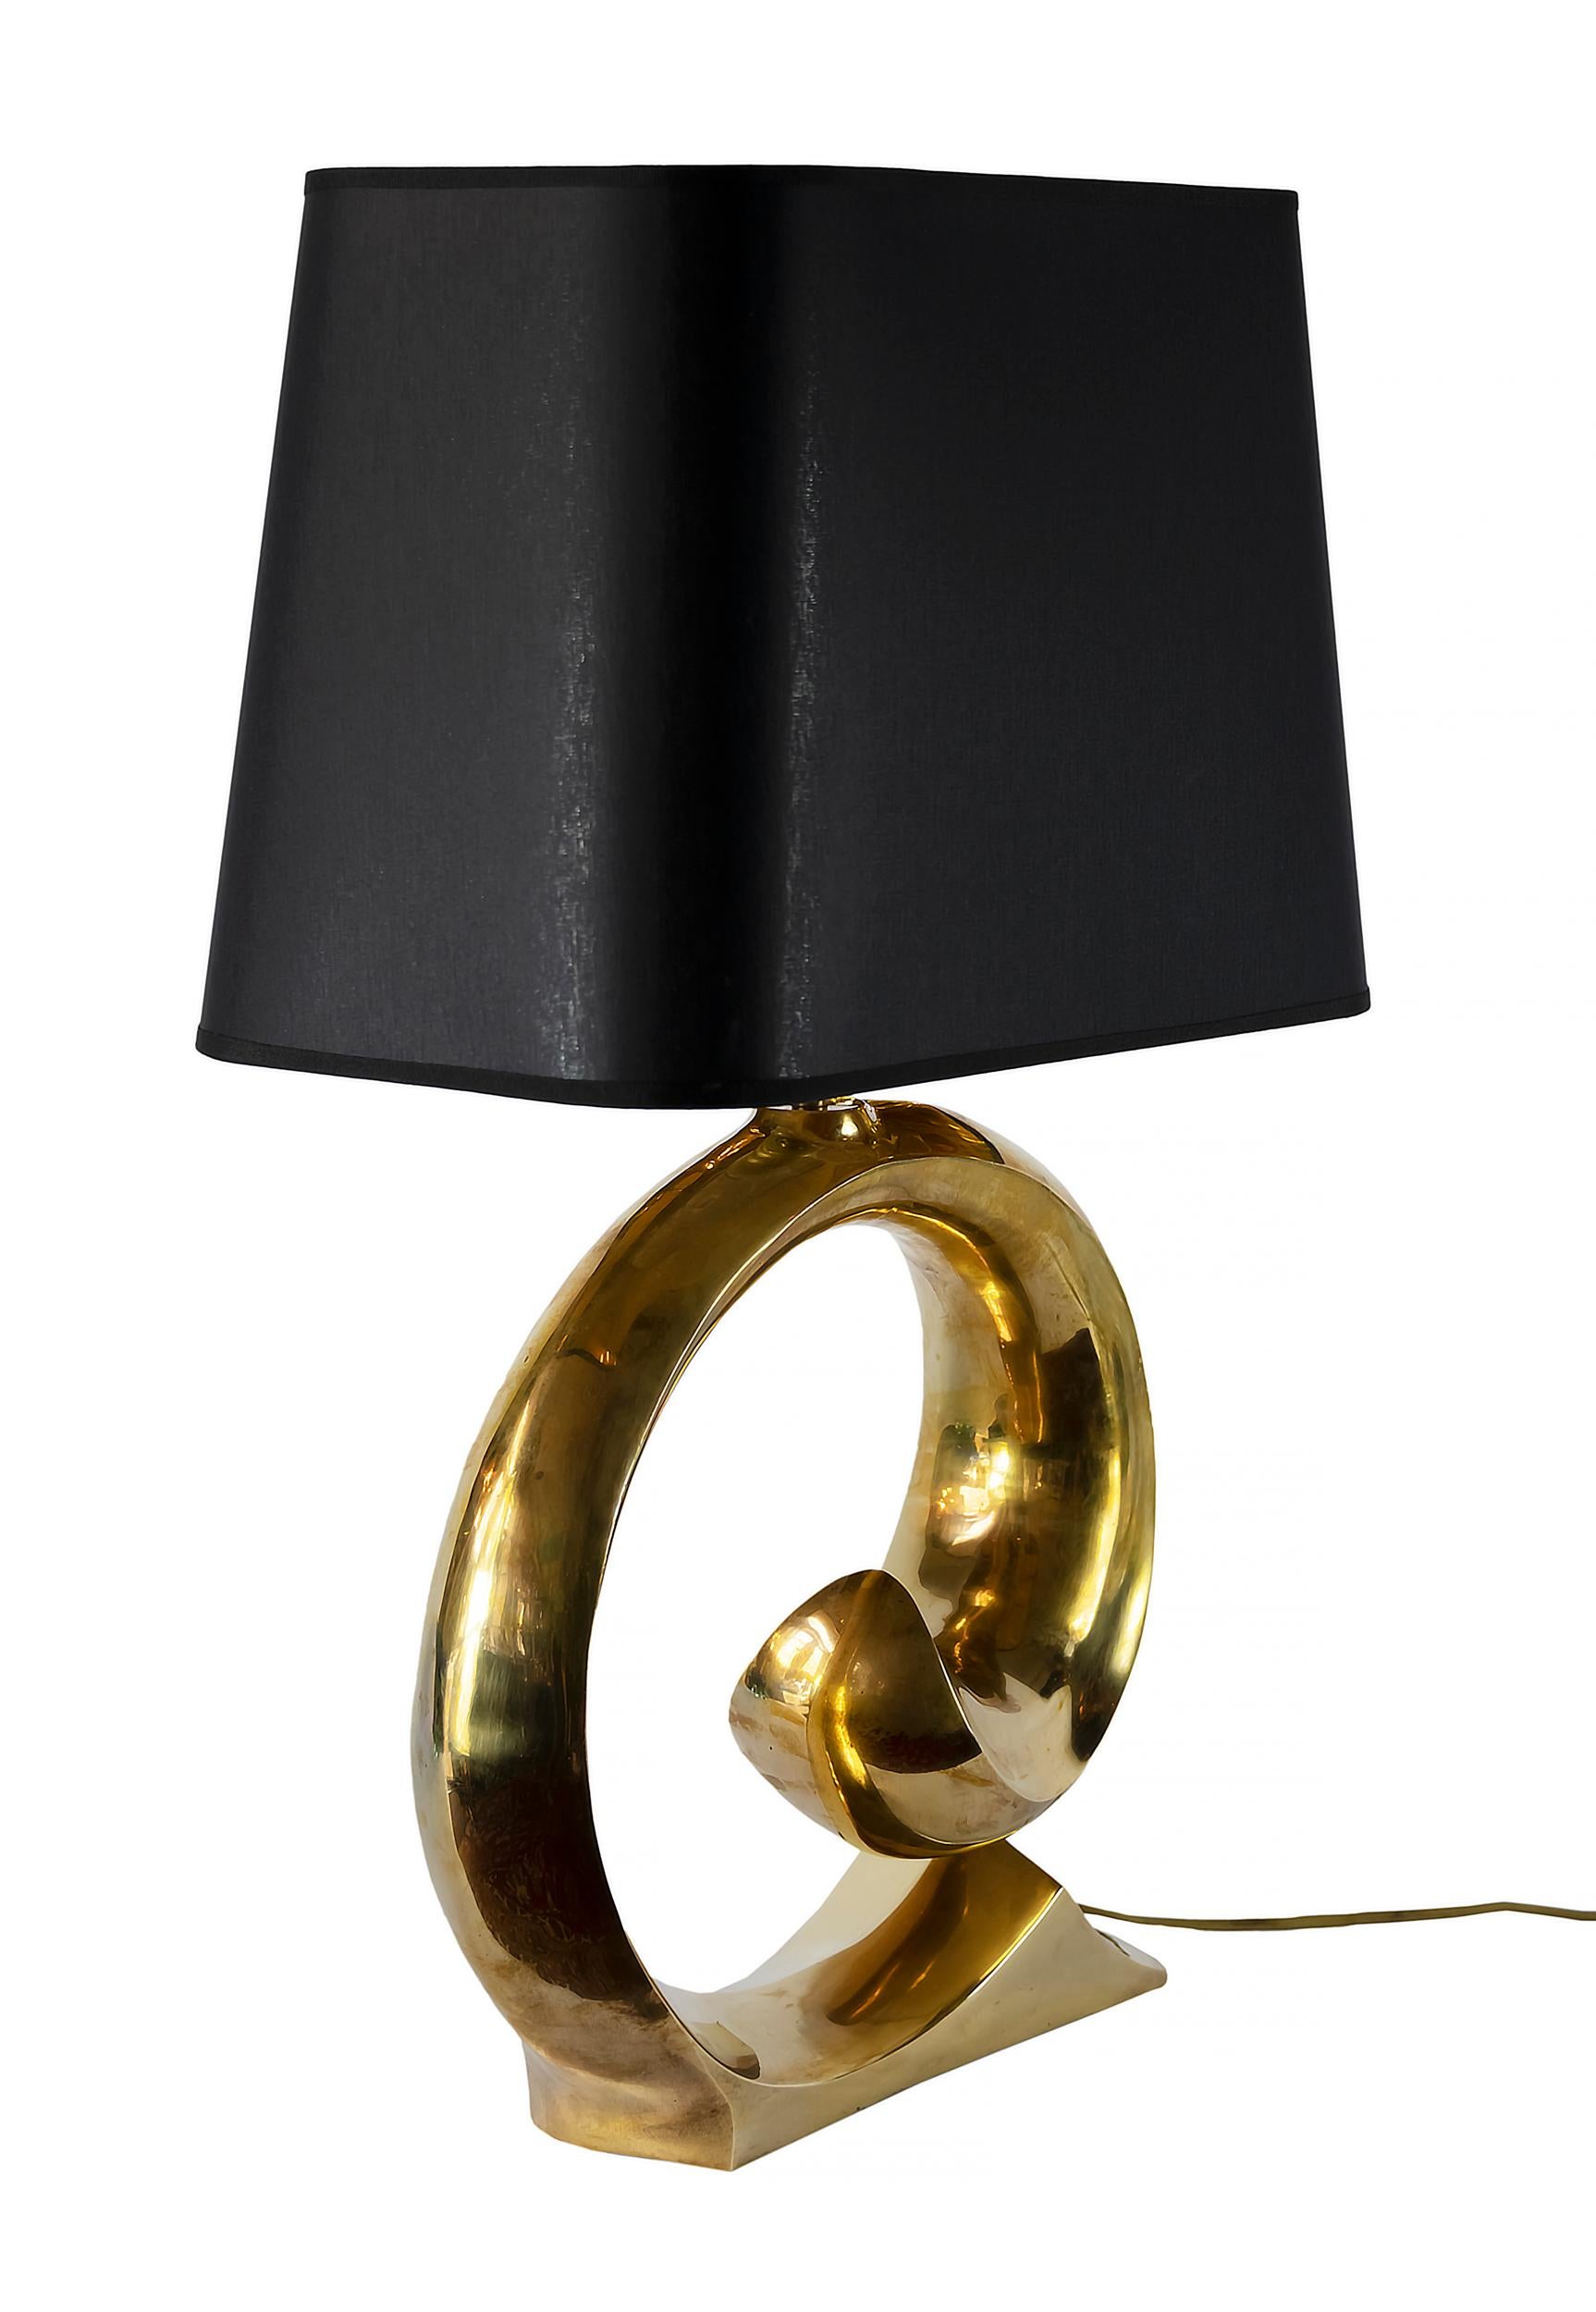 Vintage French table lamp in brass by Pierre Carding from 1970's.
Lamp is with the new made black color textile shade with gold inside.
Lamp includes E27 bulb.
 